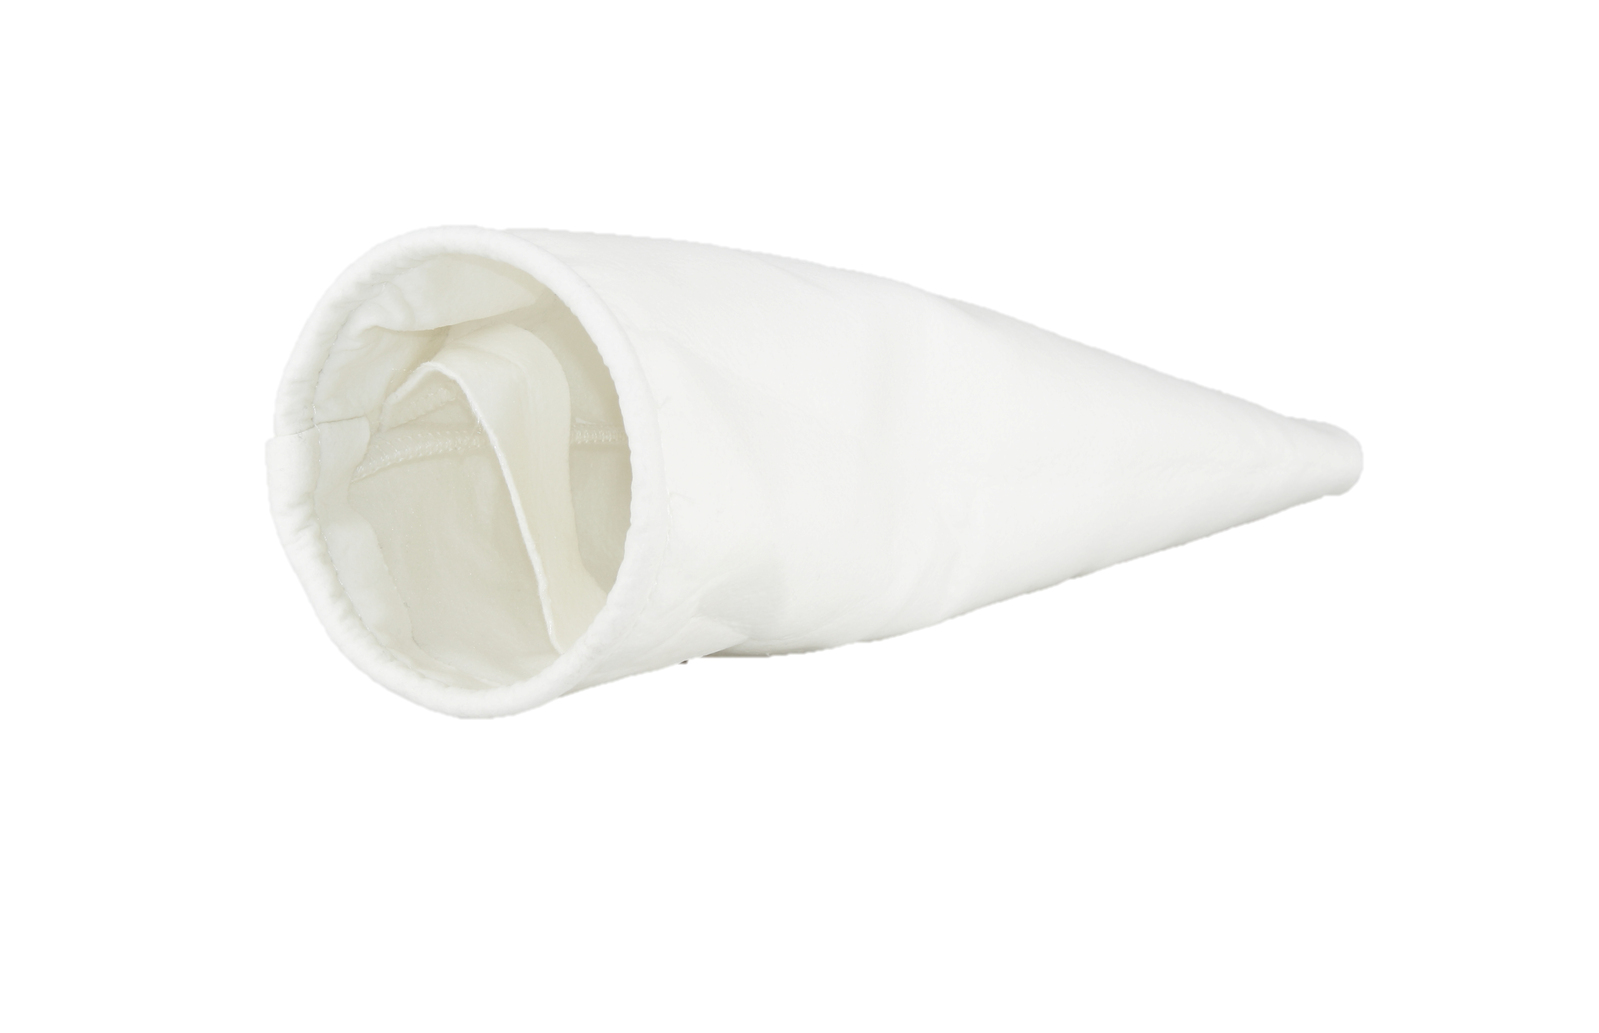 Aquastream Size 2 Polyester Bag Filter with Metal Ring Collar - 5Micron